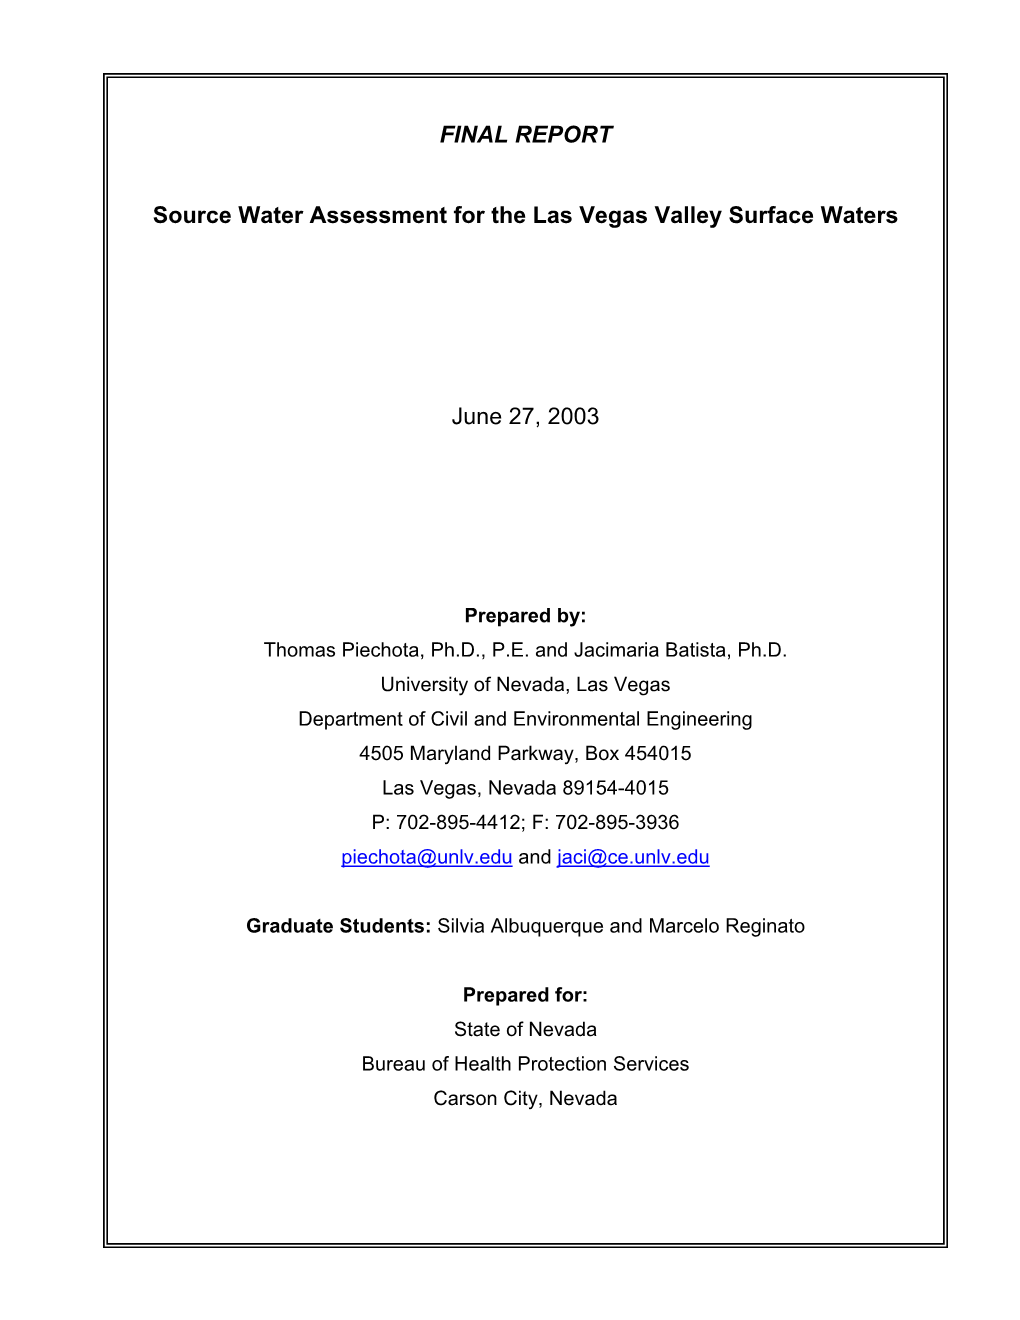 Source Water Assessment for the Las Vegas Valley Surface Waters